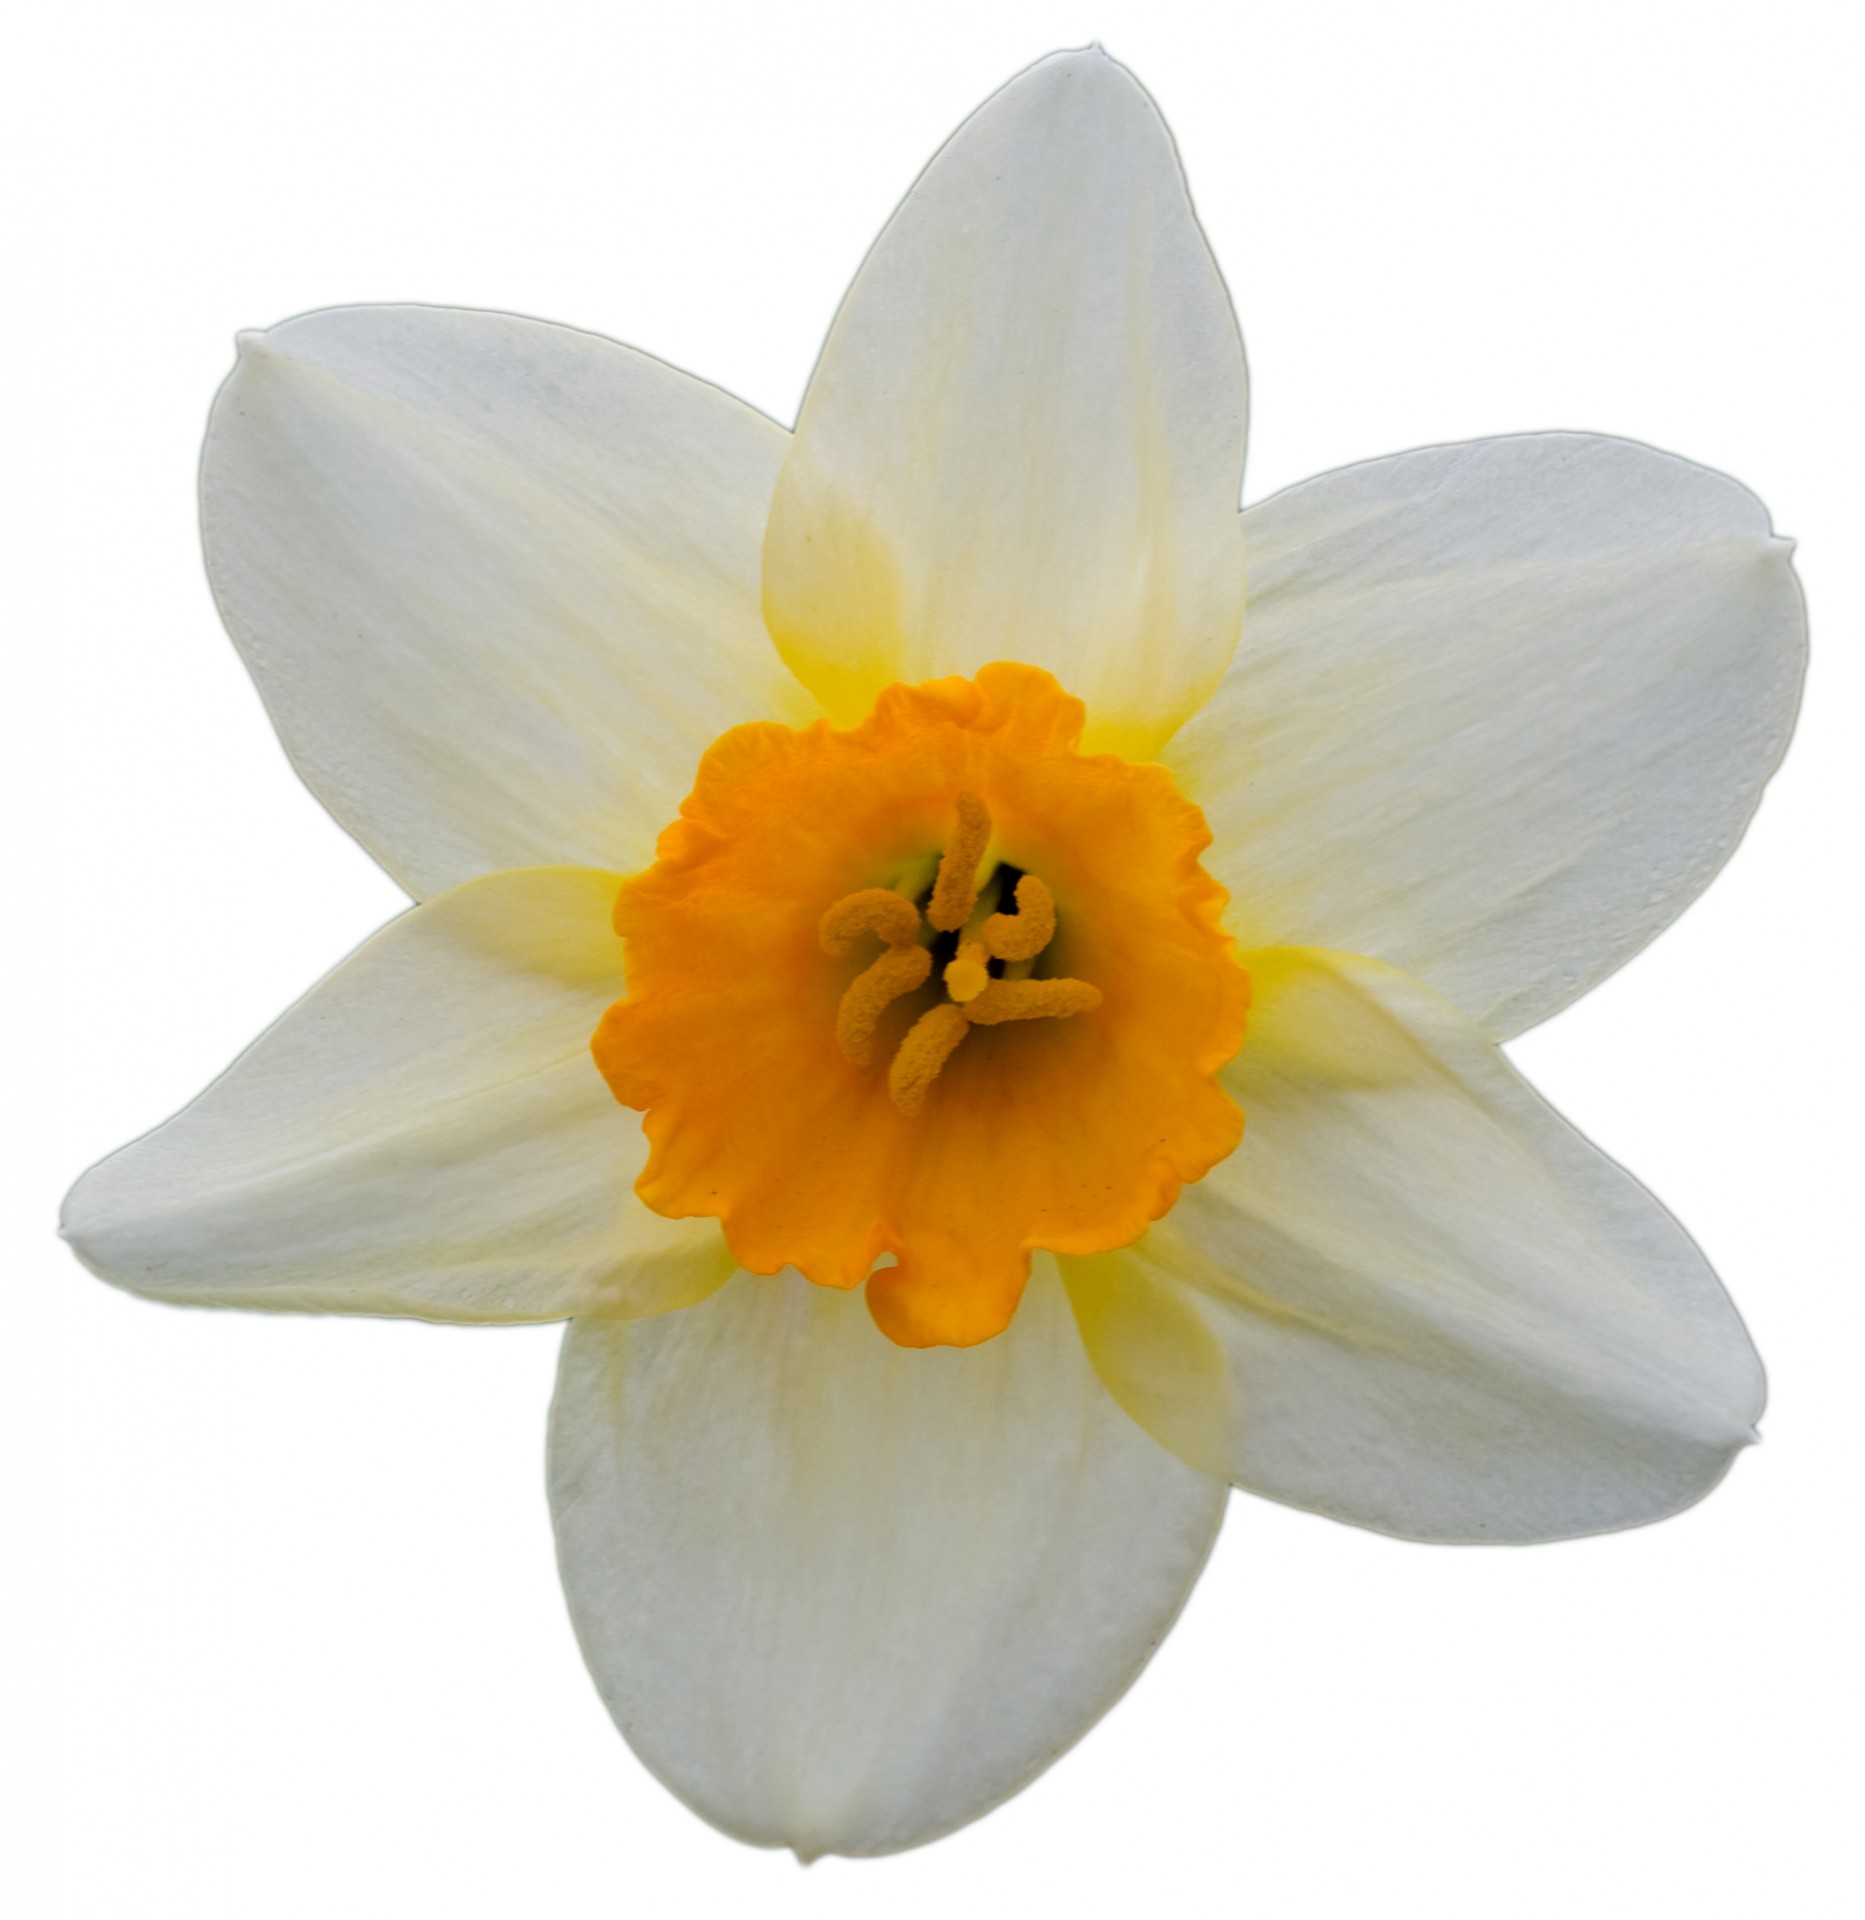 Daffodil,flower,head,isolated,white - free image from needpix.com